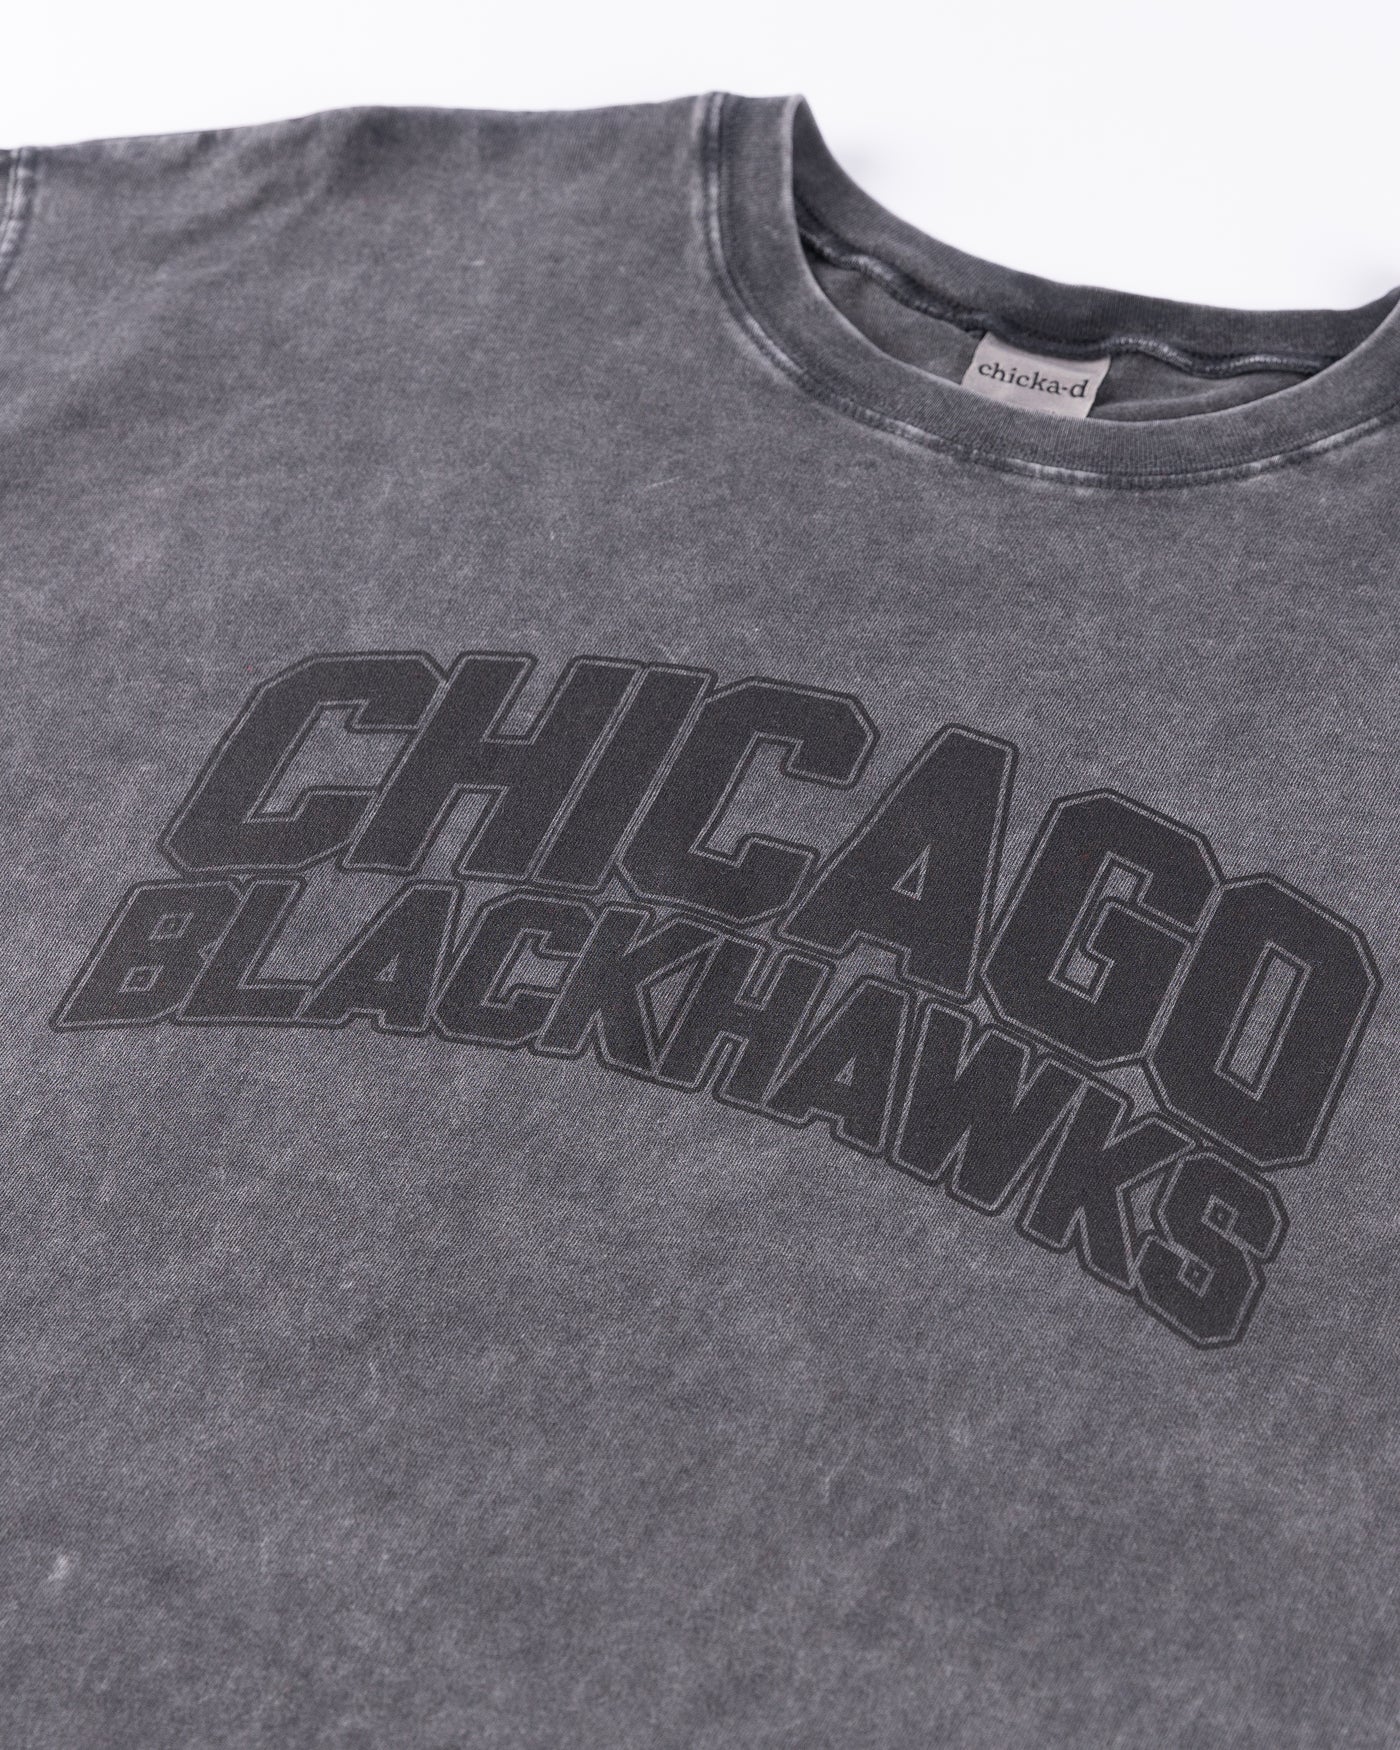 grey chicka-d oversized women's tee with Chicago Blackhawks wordmark across chest - detail lay flat